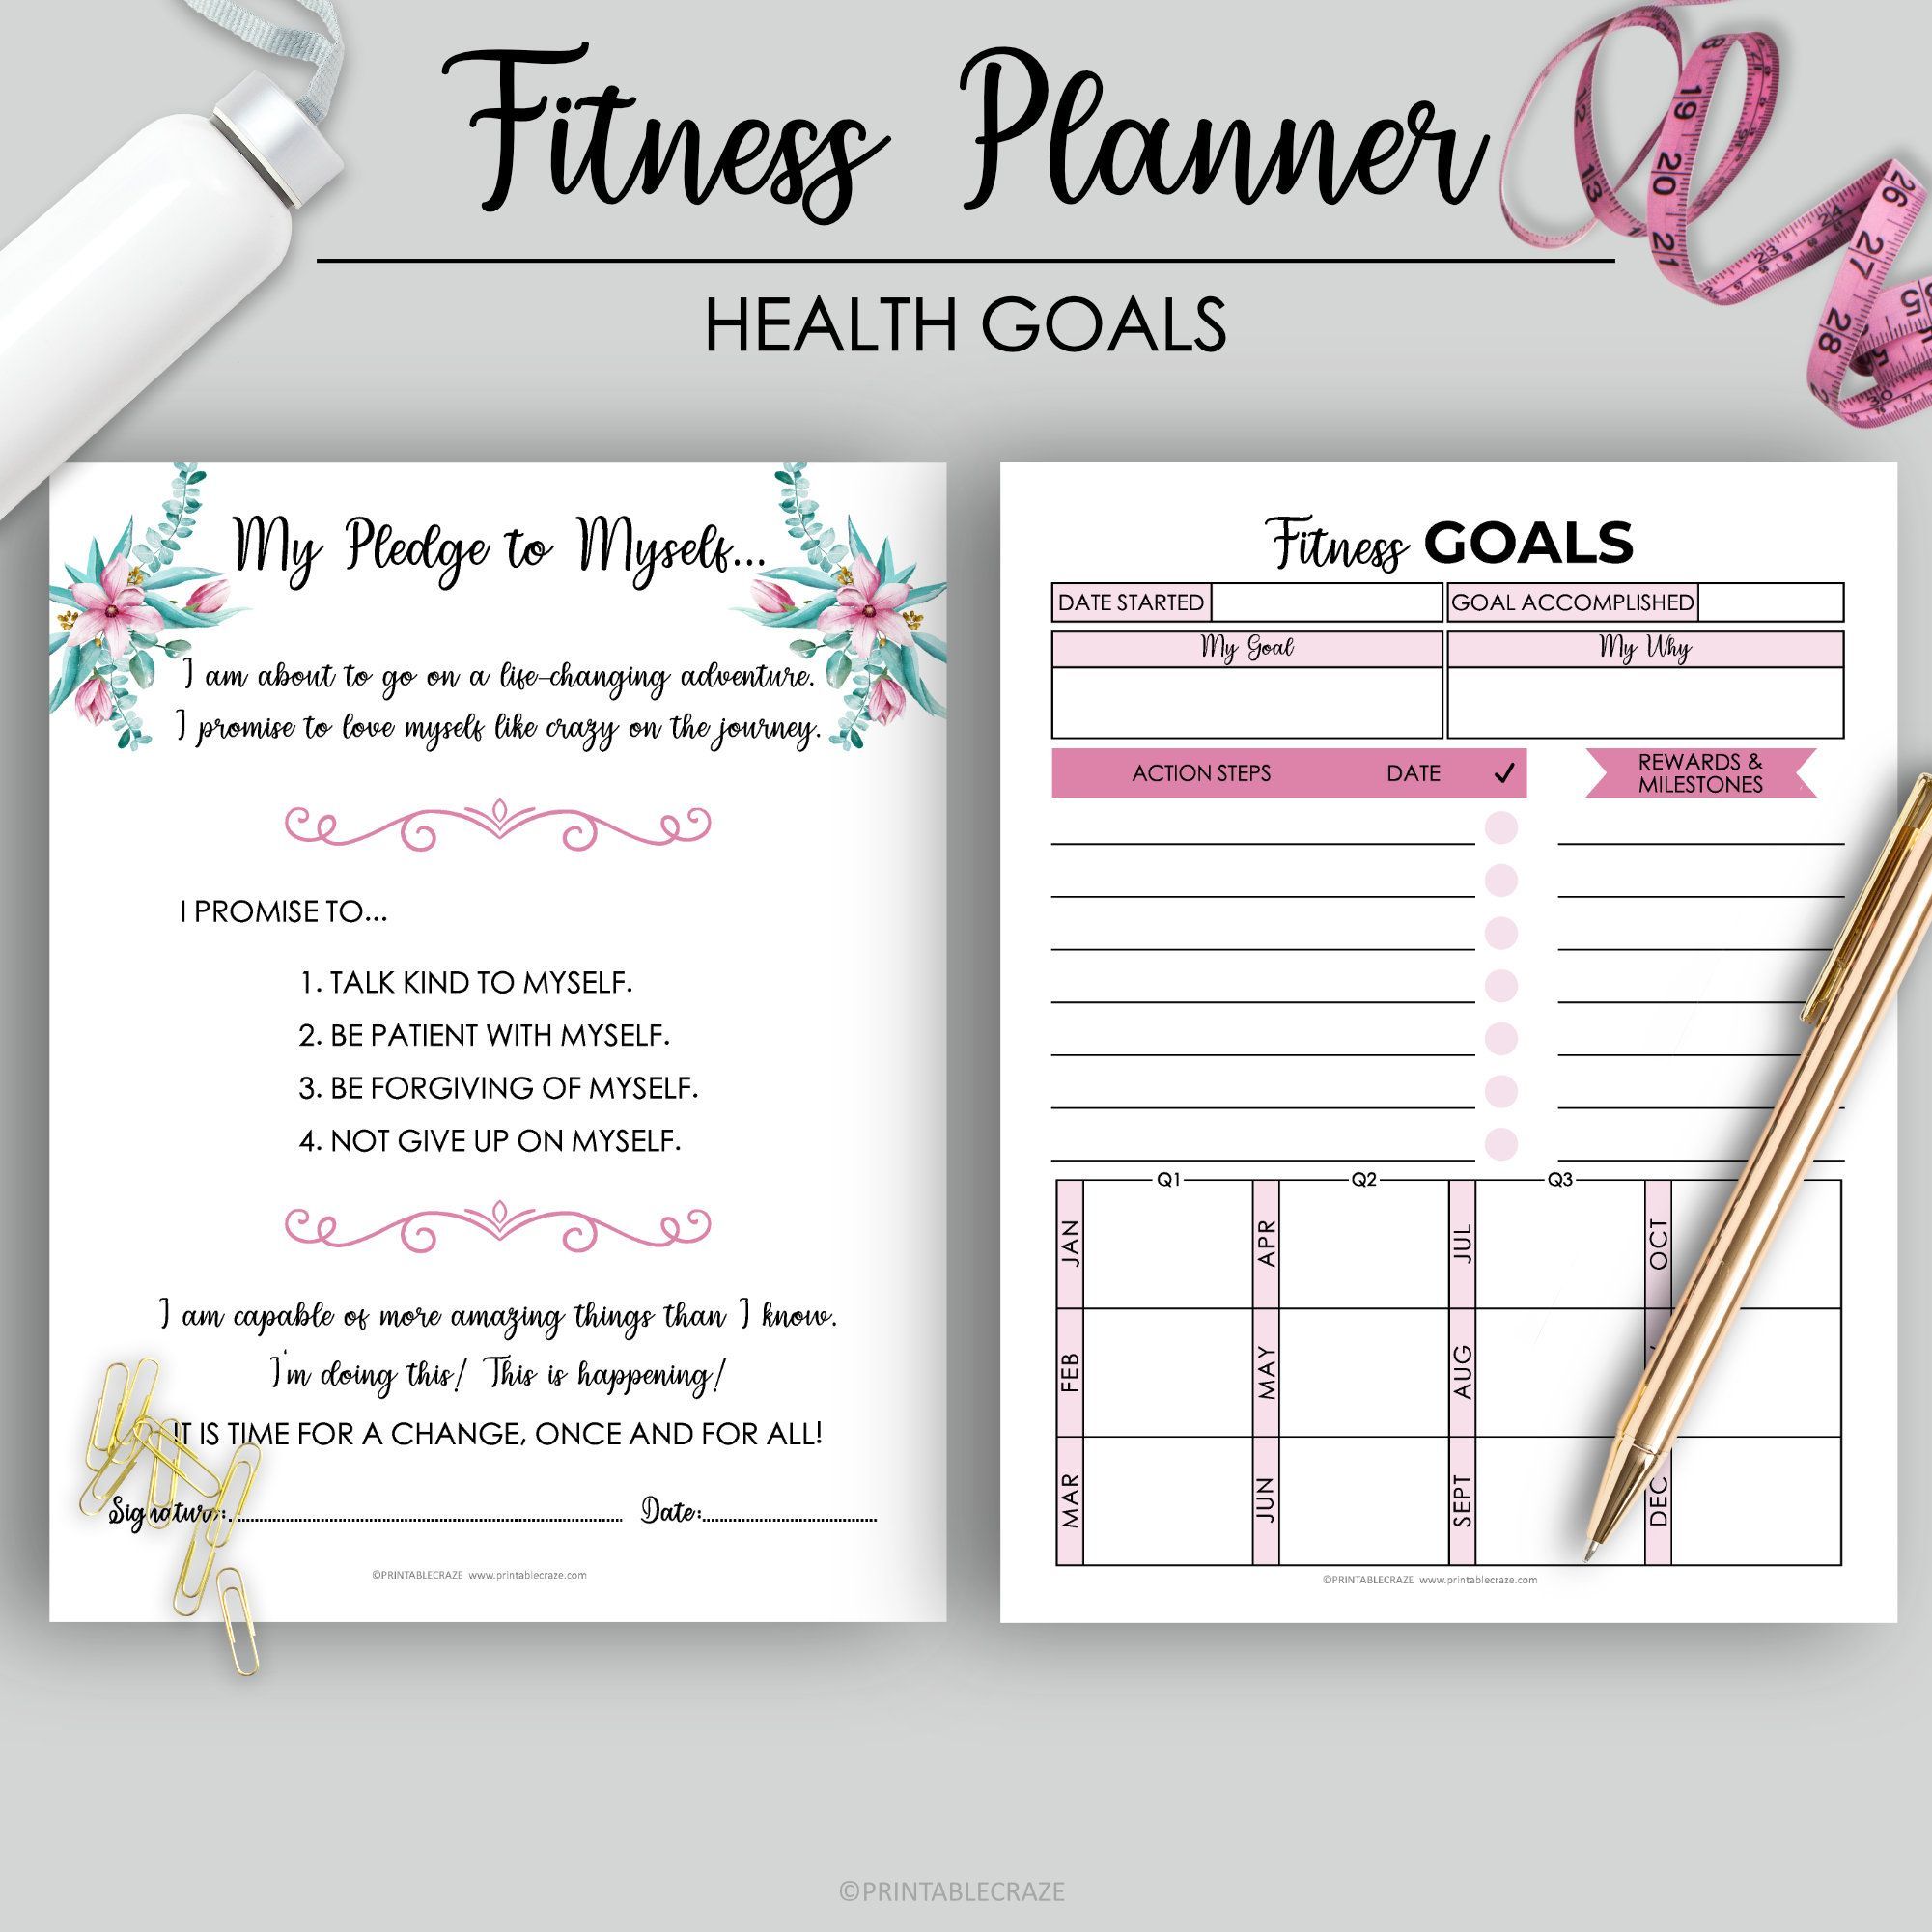 Fitness Planner Printable Weight Loss Health Planner Fitness Journal Workout Log Food Diary Calorie Tracker Daily Weight Loss Step Tracker - Fitness Planner Printable Weight Loss Health Planner Fitness Journal Workout Log Food Diary Calorie Tracker Daily Weight Loss Step Tracker -   17 fitness Planner gratuit ideas